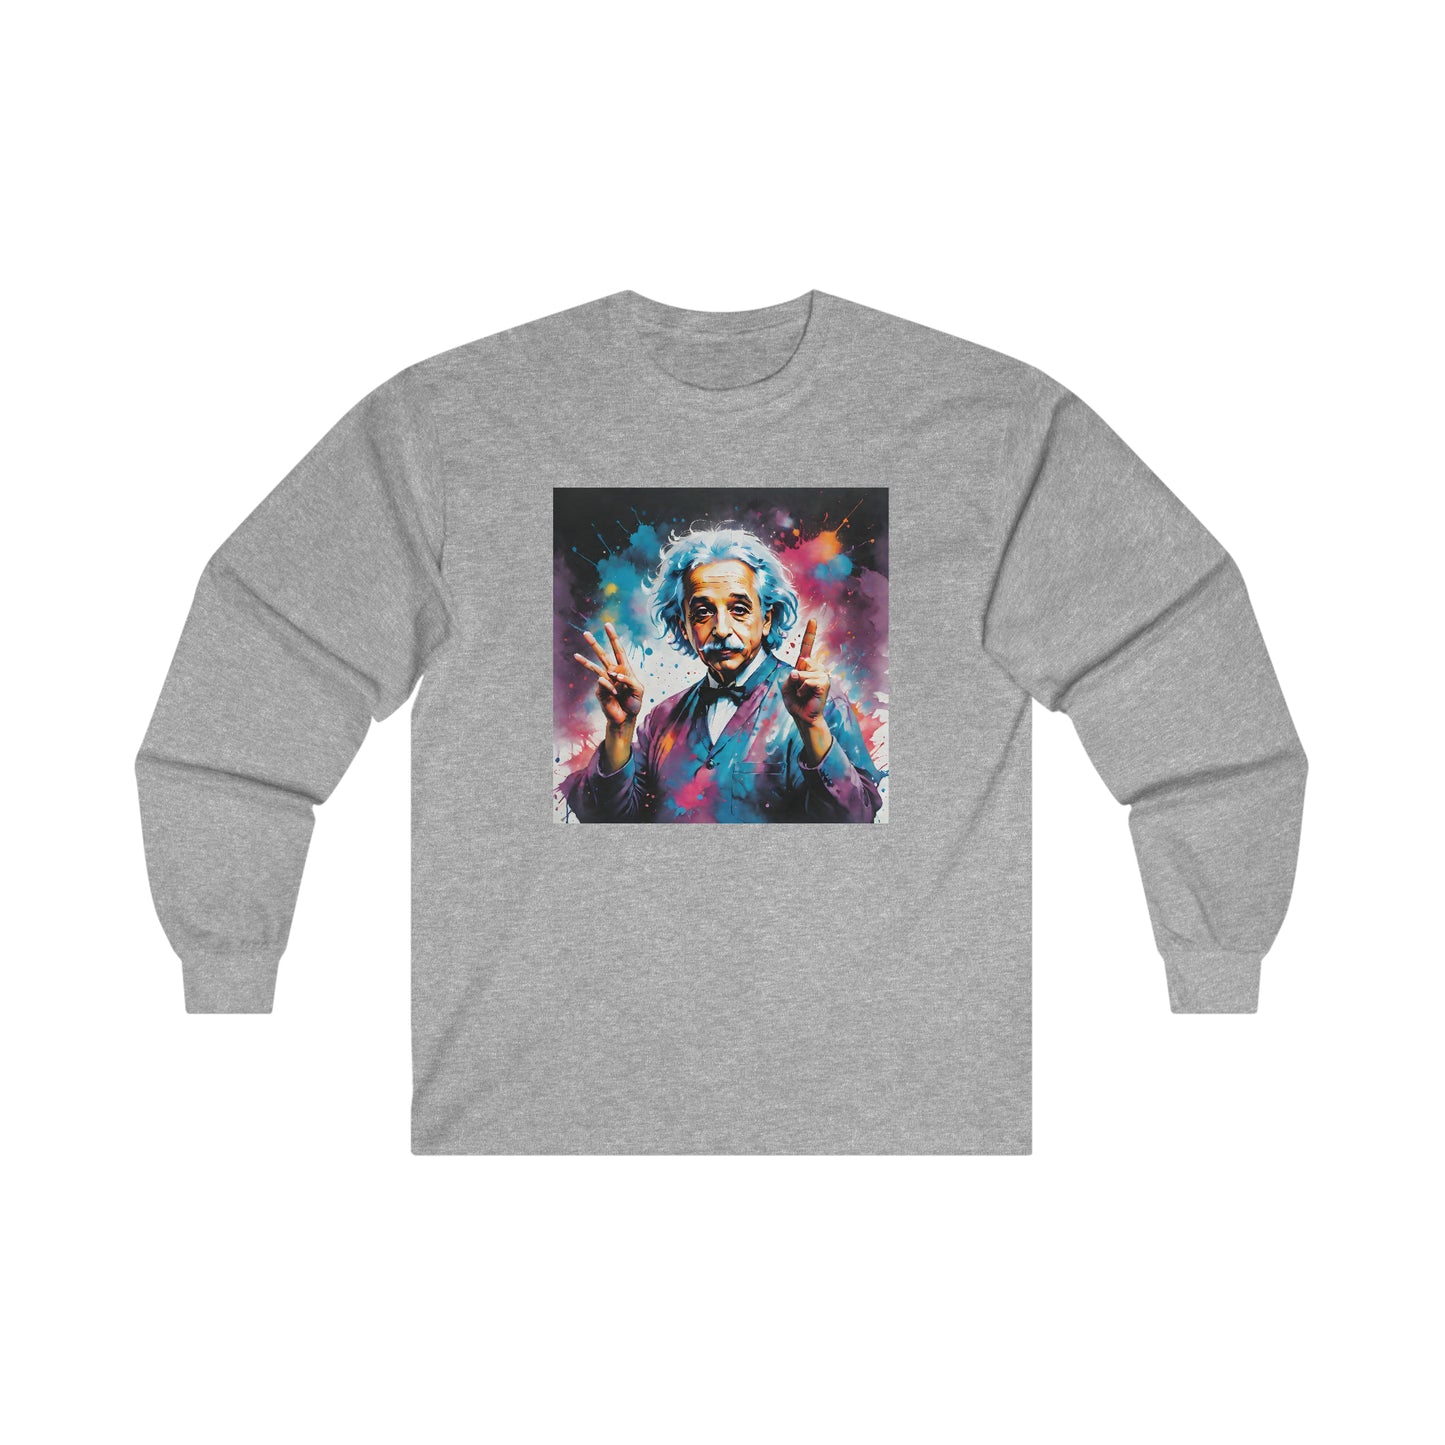 "The theory of everything" Single Print Ultra Cotton Long Sleeve Tee